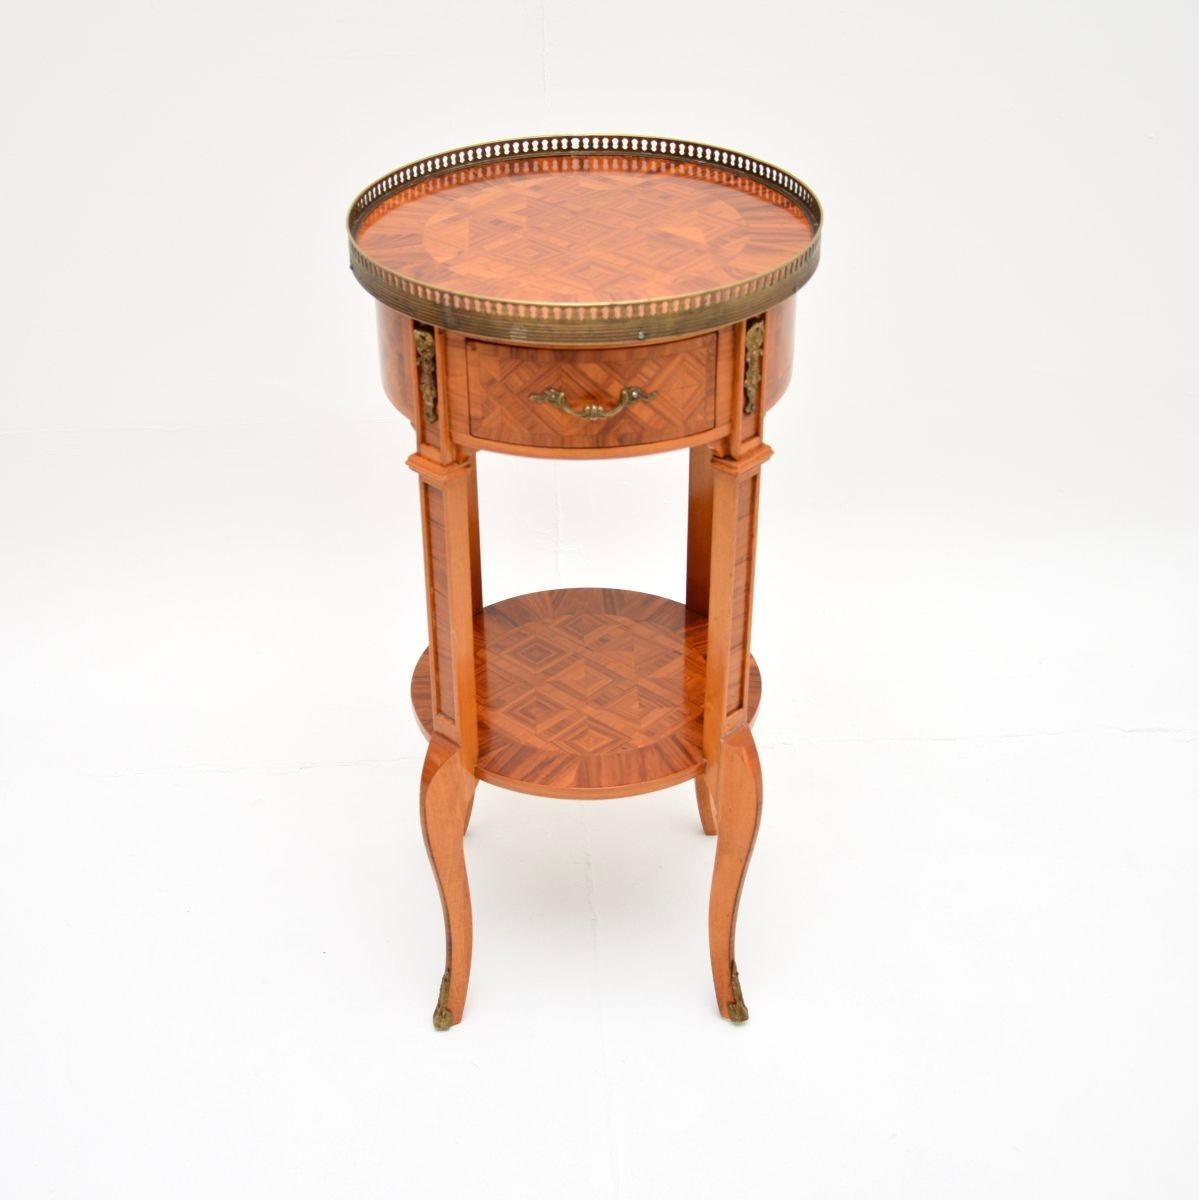 An absolutely stunning antique French inlaid walnut side table, dating from around the 1930’s.

This is of superb quality, it is beautifully designed and is a very useful size. It is made with a solid walnut construction and gorgeous walnut veneers,